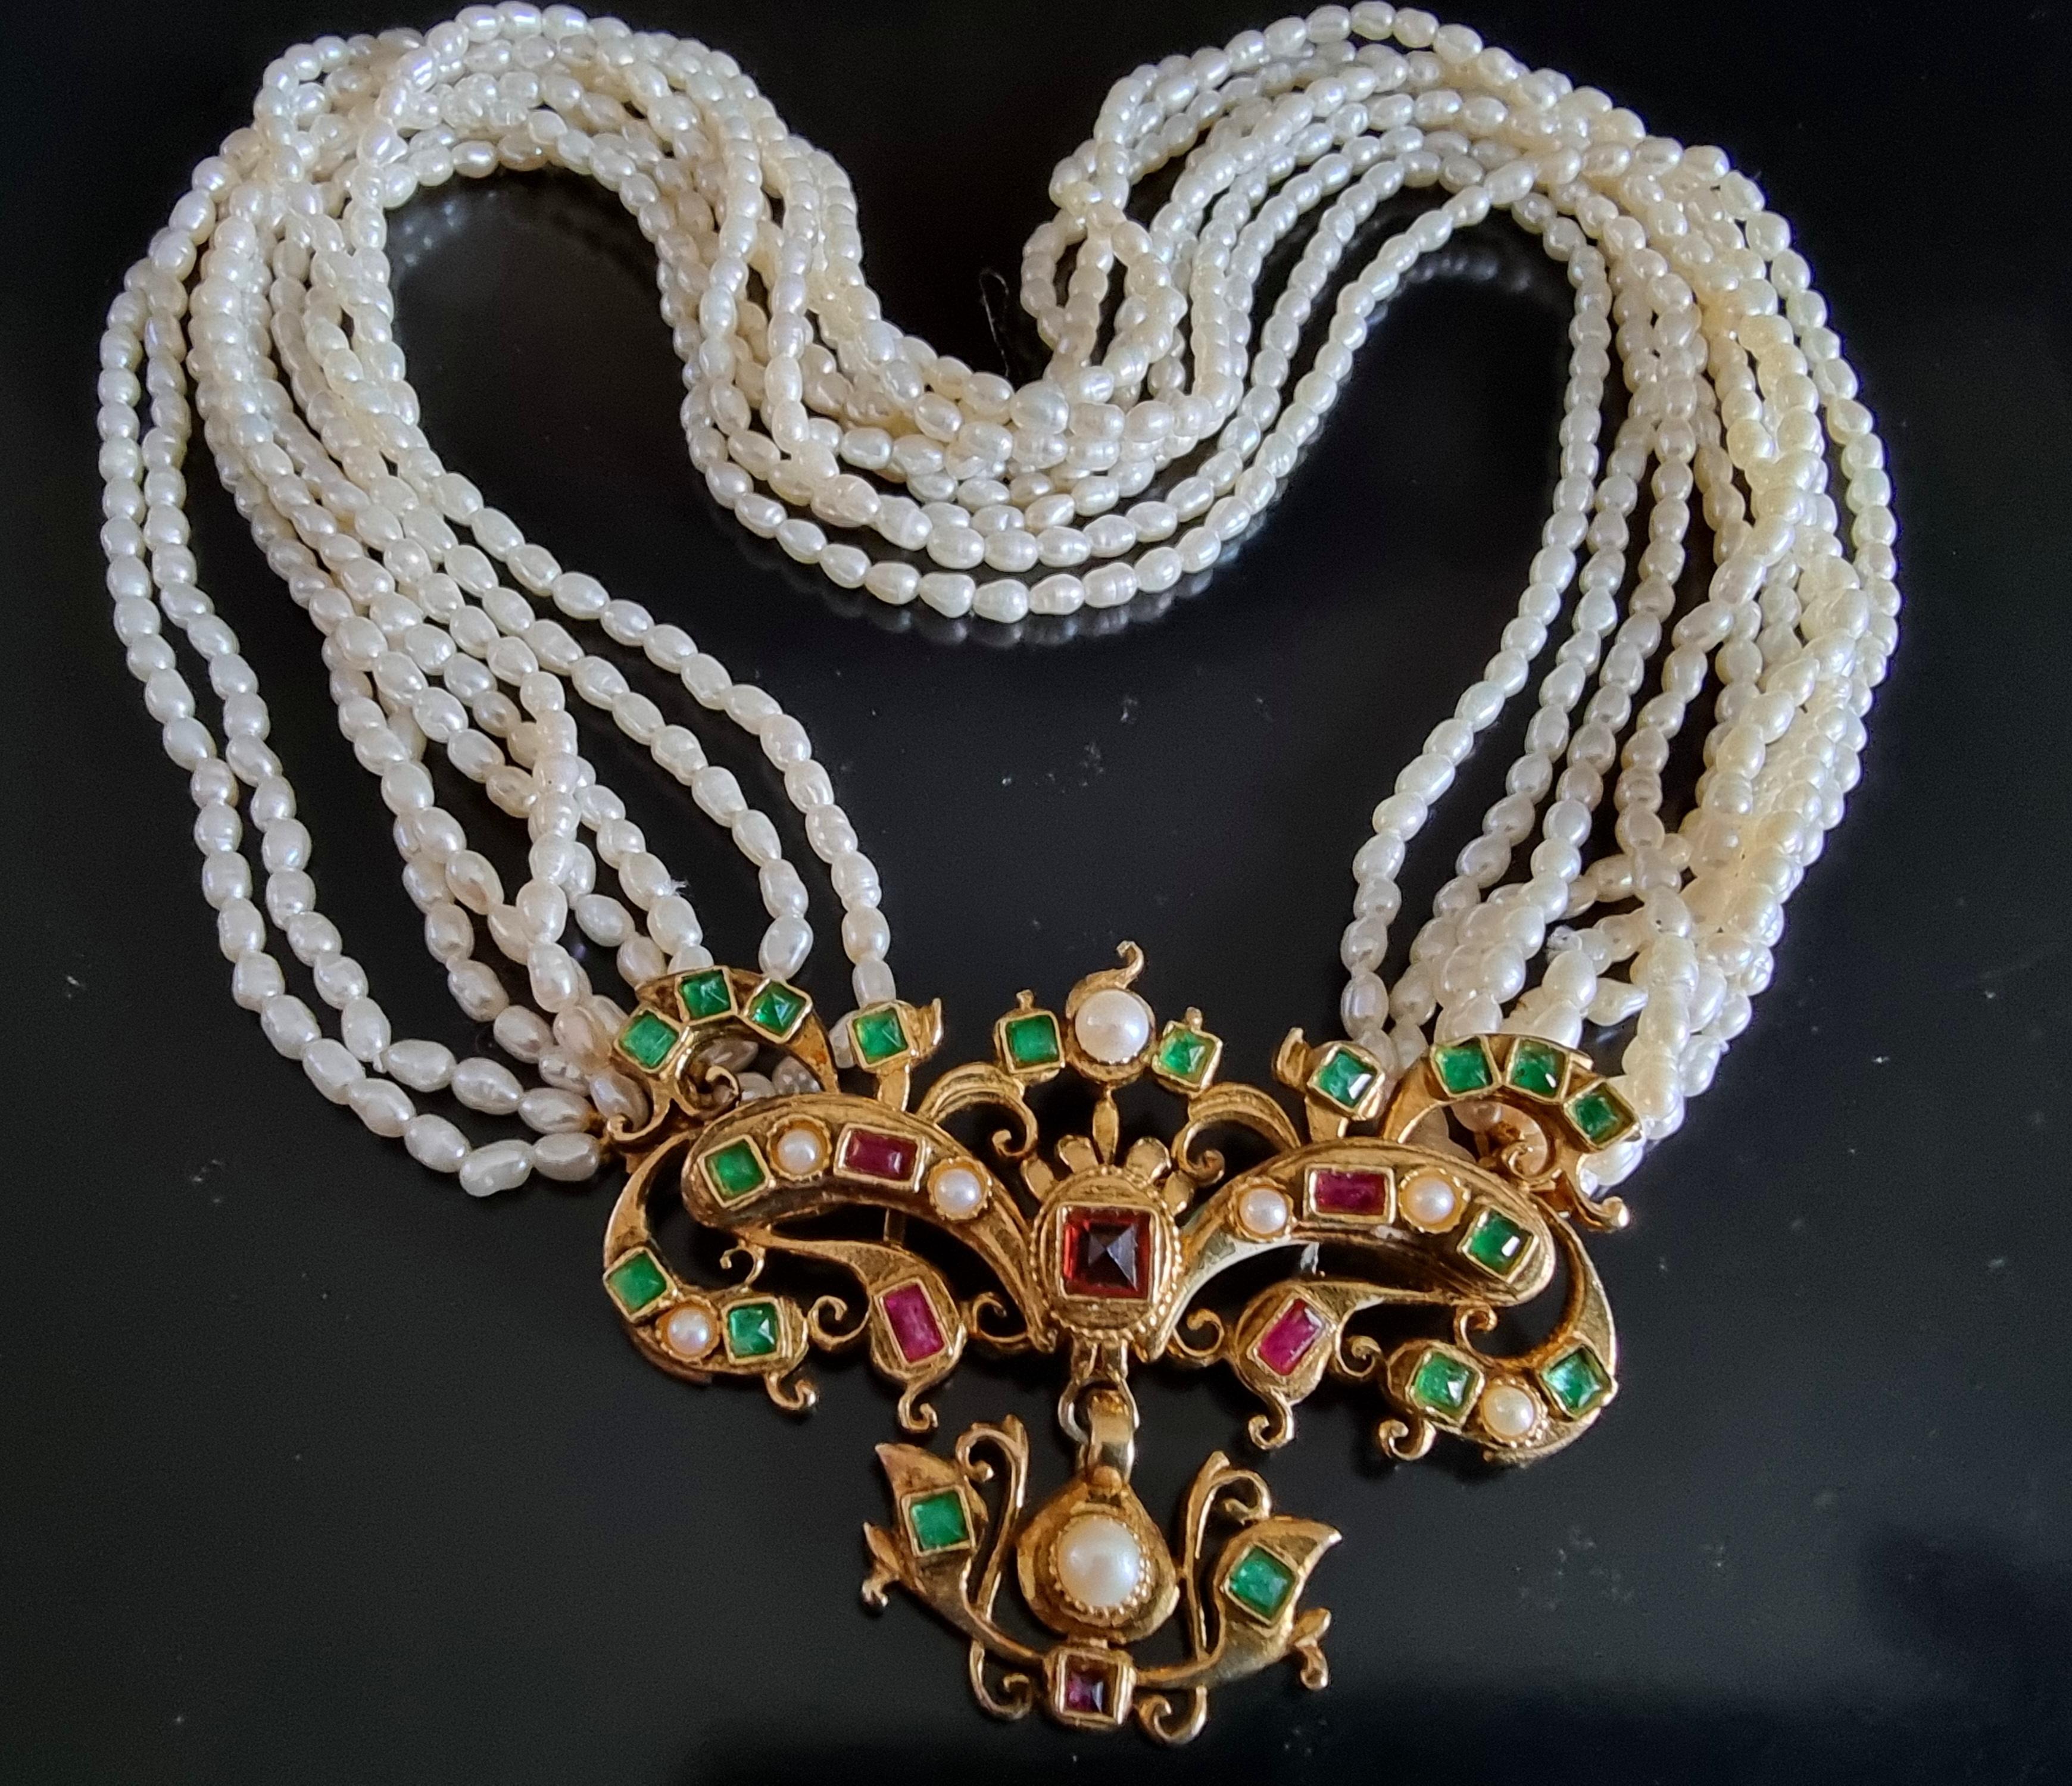 Magnificent 18th century style NECKLACE,
French High Fashion,
70s - 80s vintage,
composed of 9 rows of cultured pearls,
removable central motif depicting a two-sided knot in 800 thousandths silver vermeil
set with cultured pearls and colored